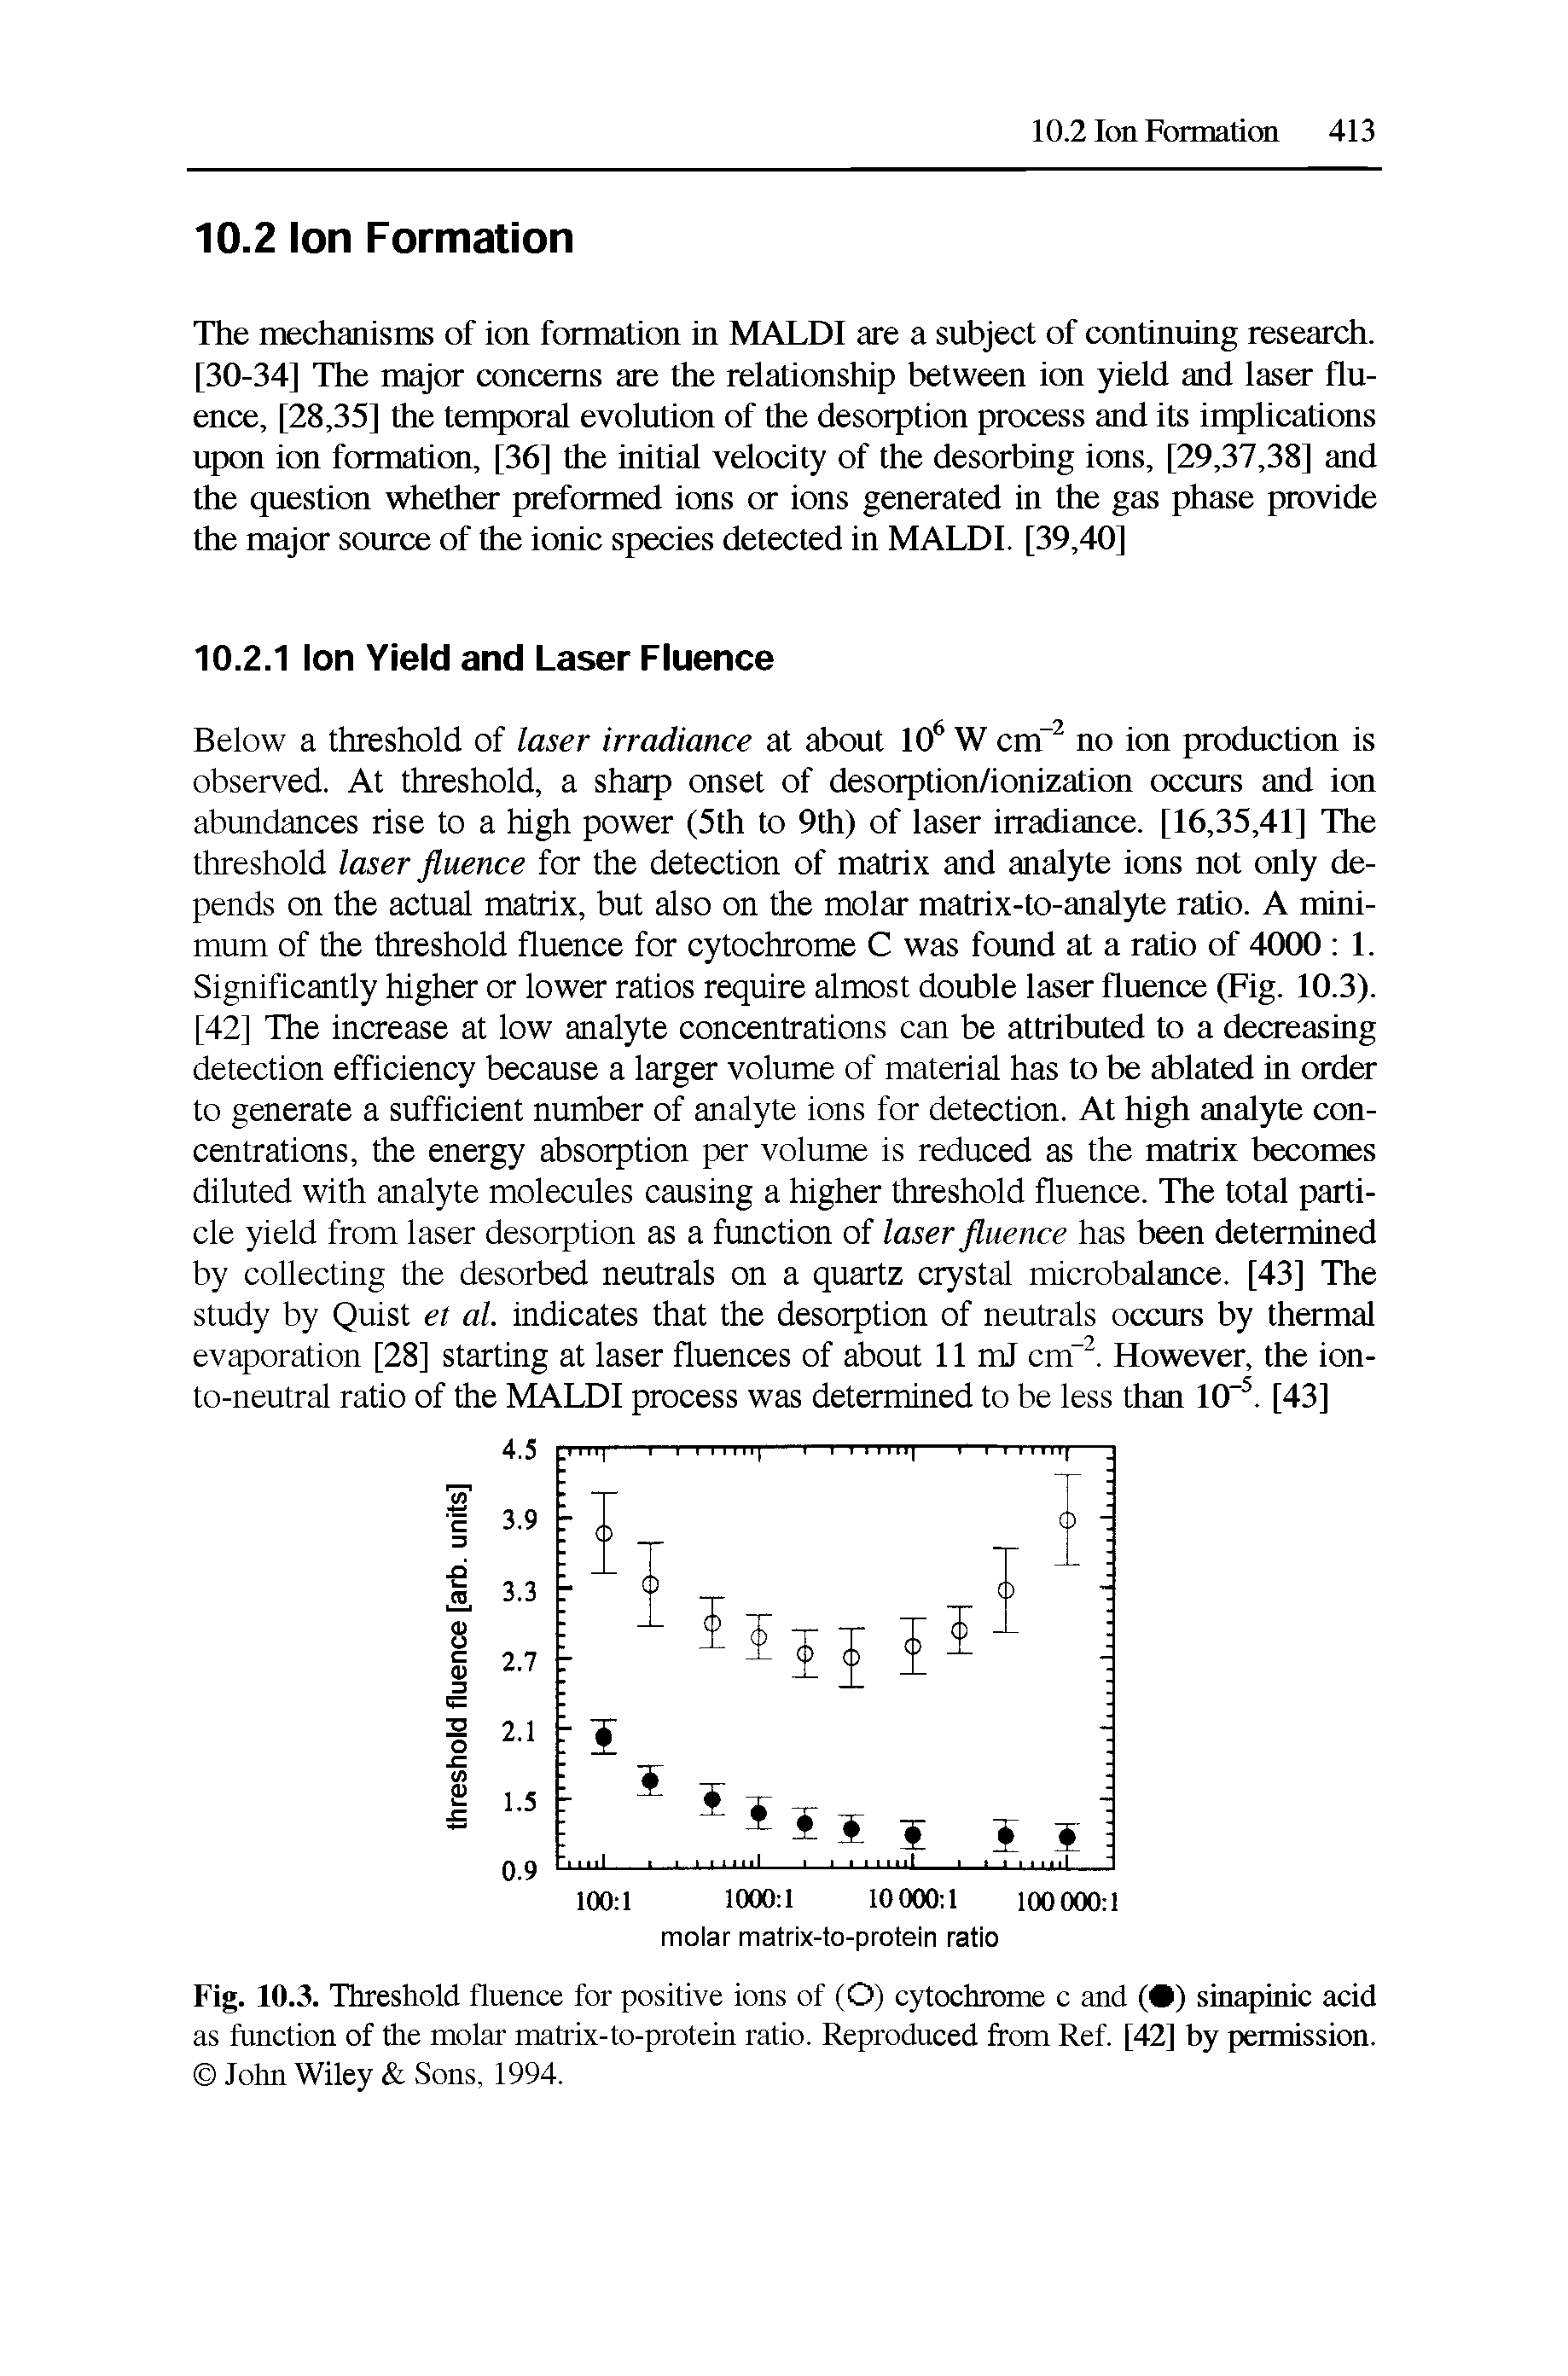 Fig. 10.3. Threshold fluence for positive ions of (O) cytochrome c and ( ) sinapinic acid as function of the molar matrix-to-protein ratio. Reproduced from Ref [42] by permission. John Wiley Sons, 1994.